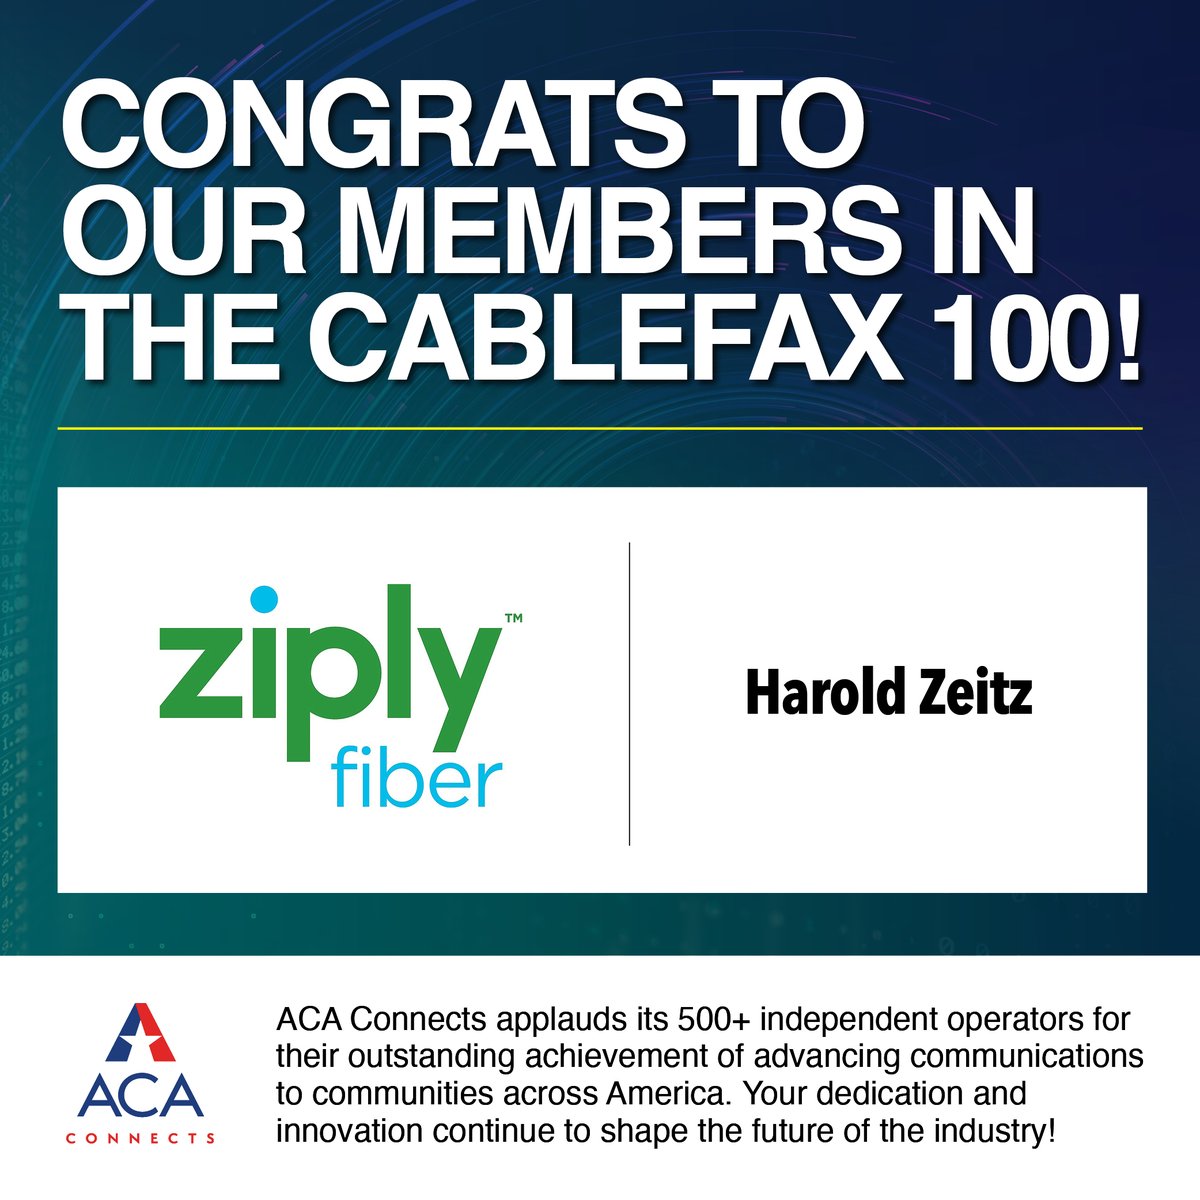 Congratulations to Harold Zeitz of @ZiplyFiber, an ACA Connects Member, for being honored in the @Cablefax 100 issue. cablefax.com/event/cablefax…